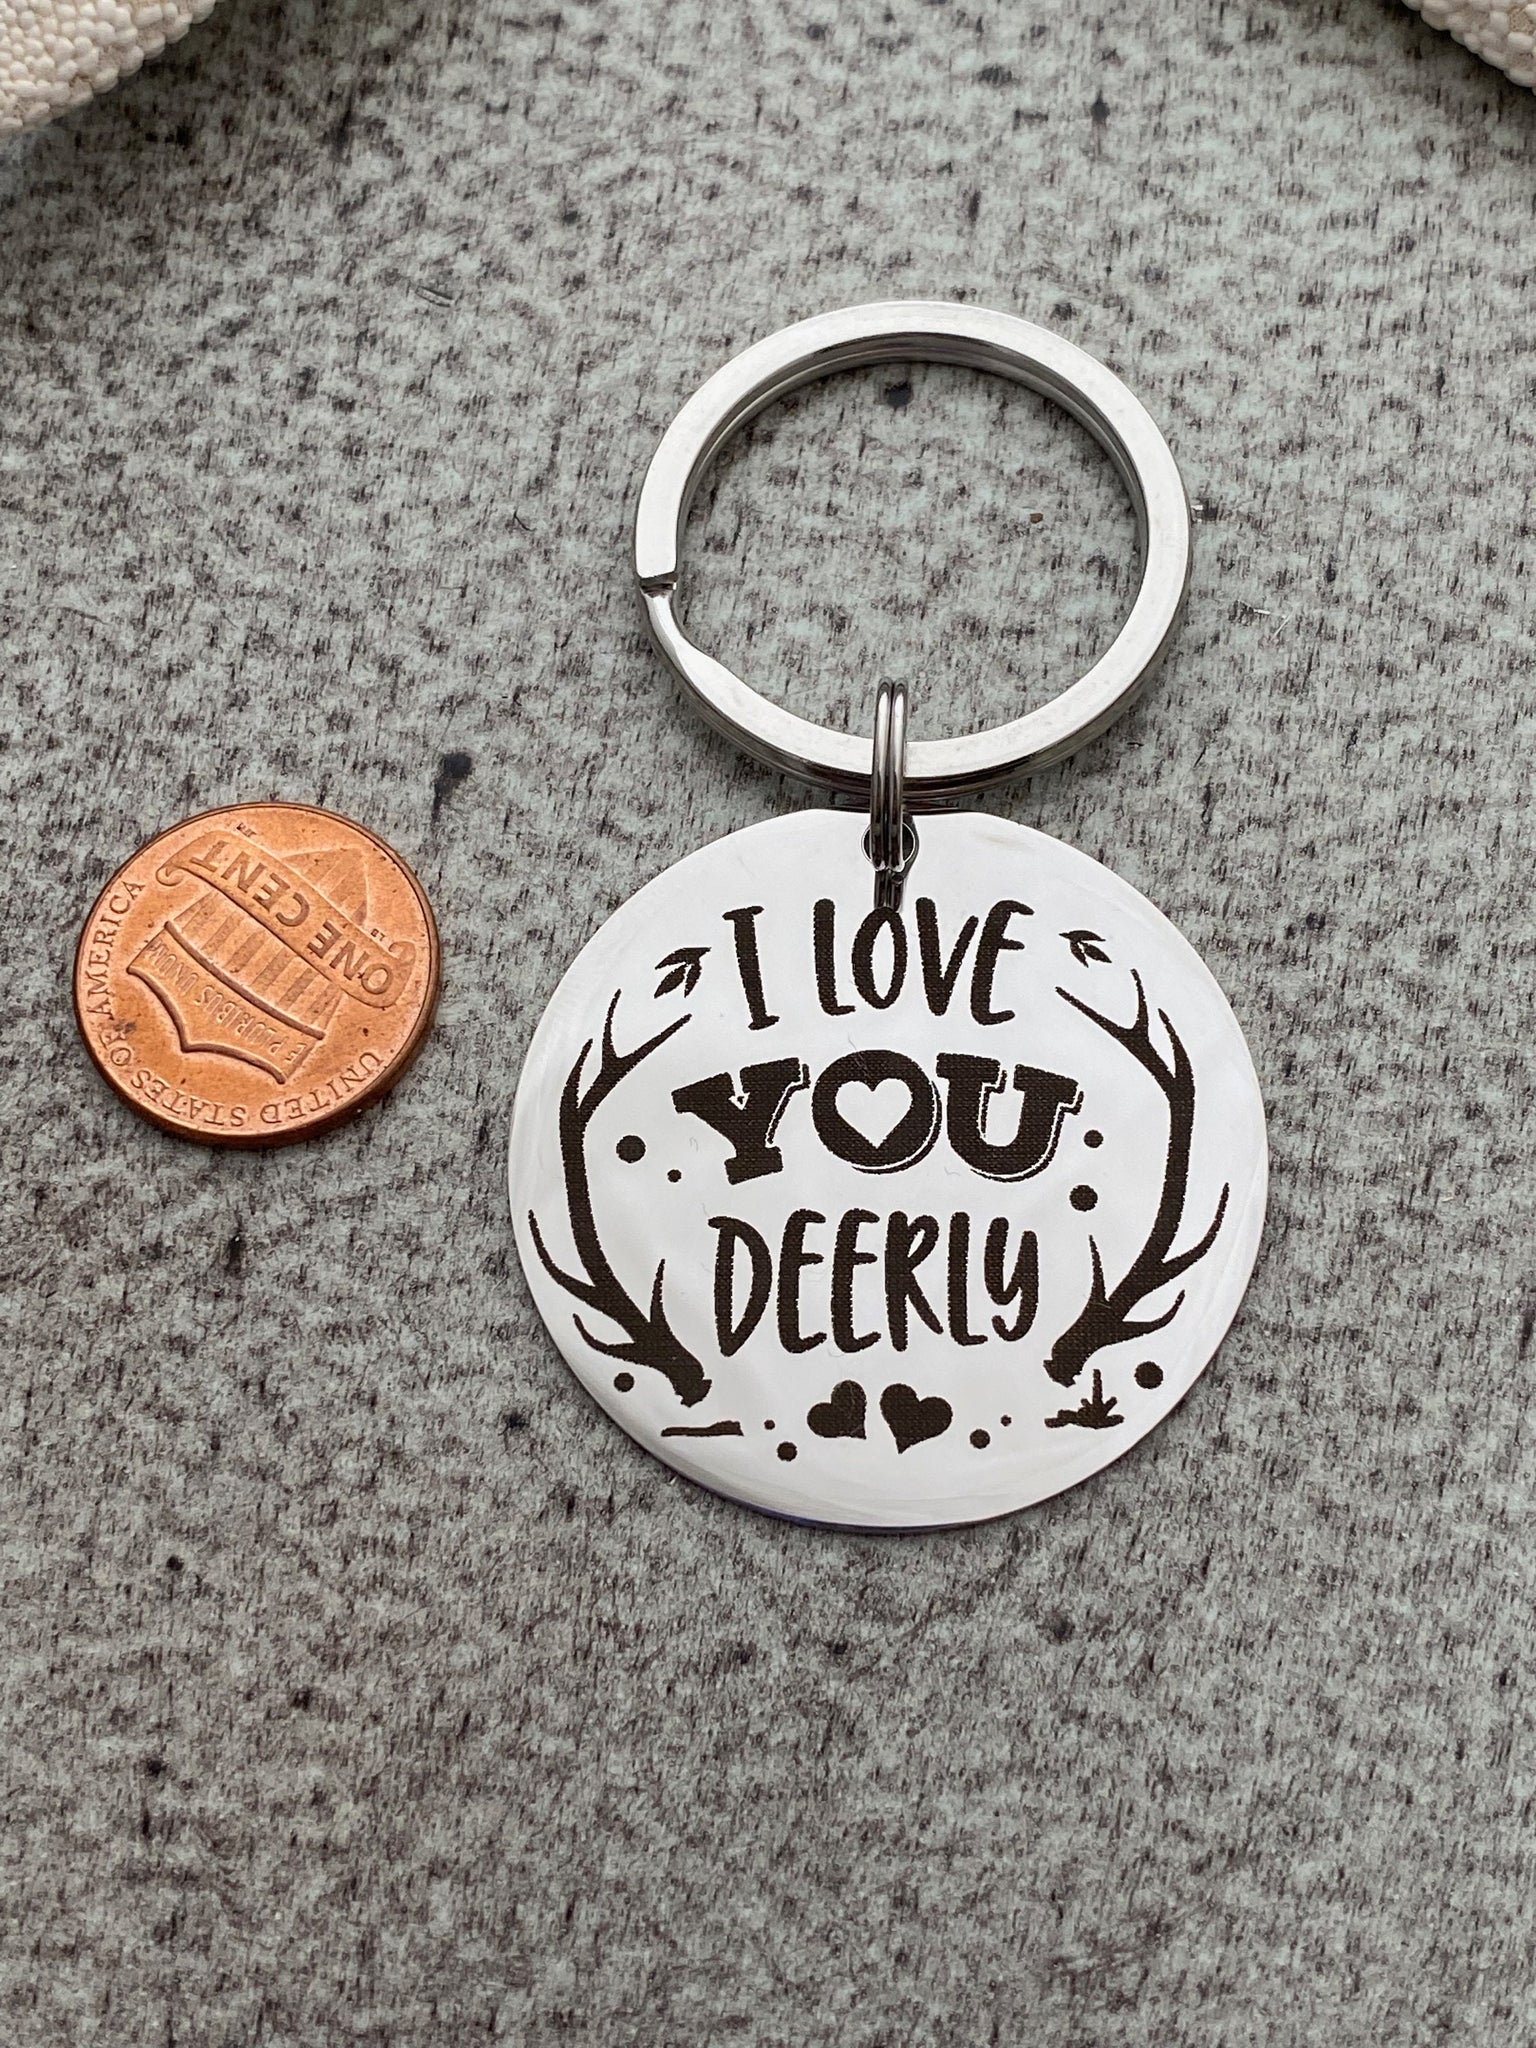 Engraved Silver Coin Key Chain